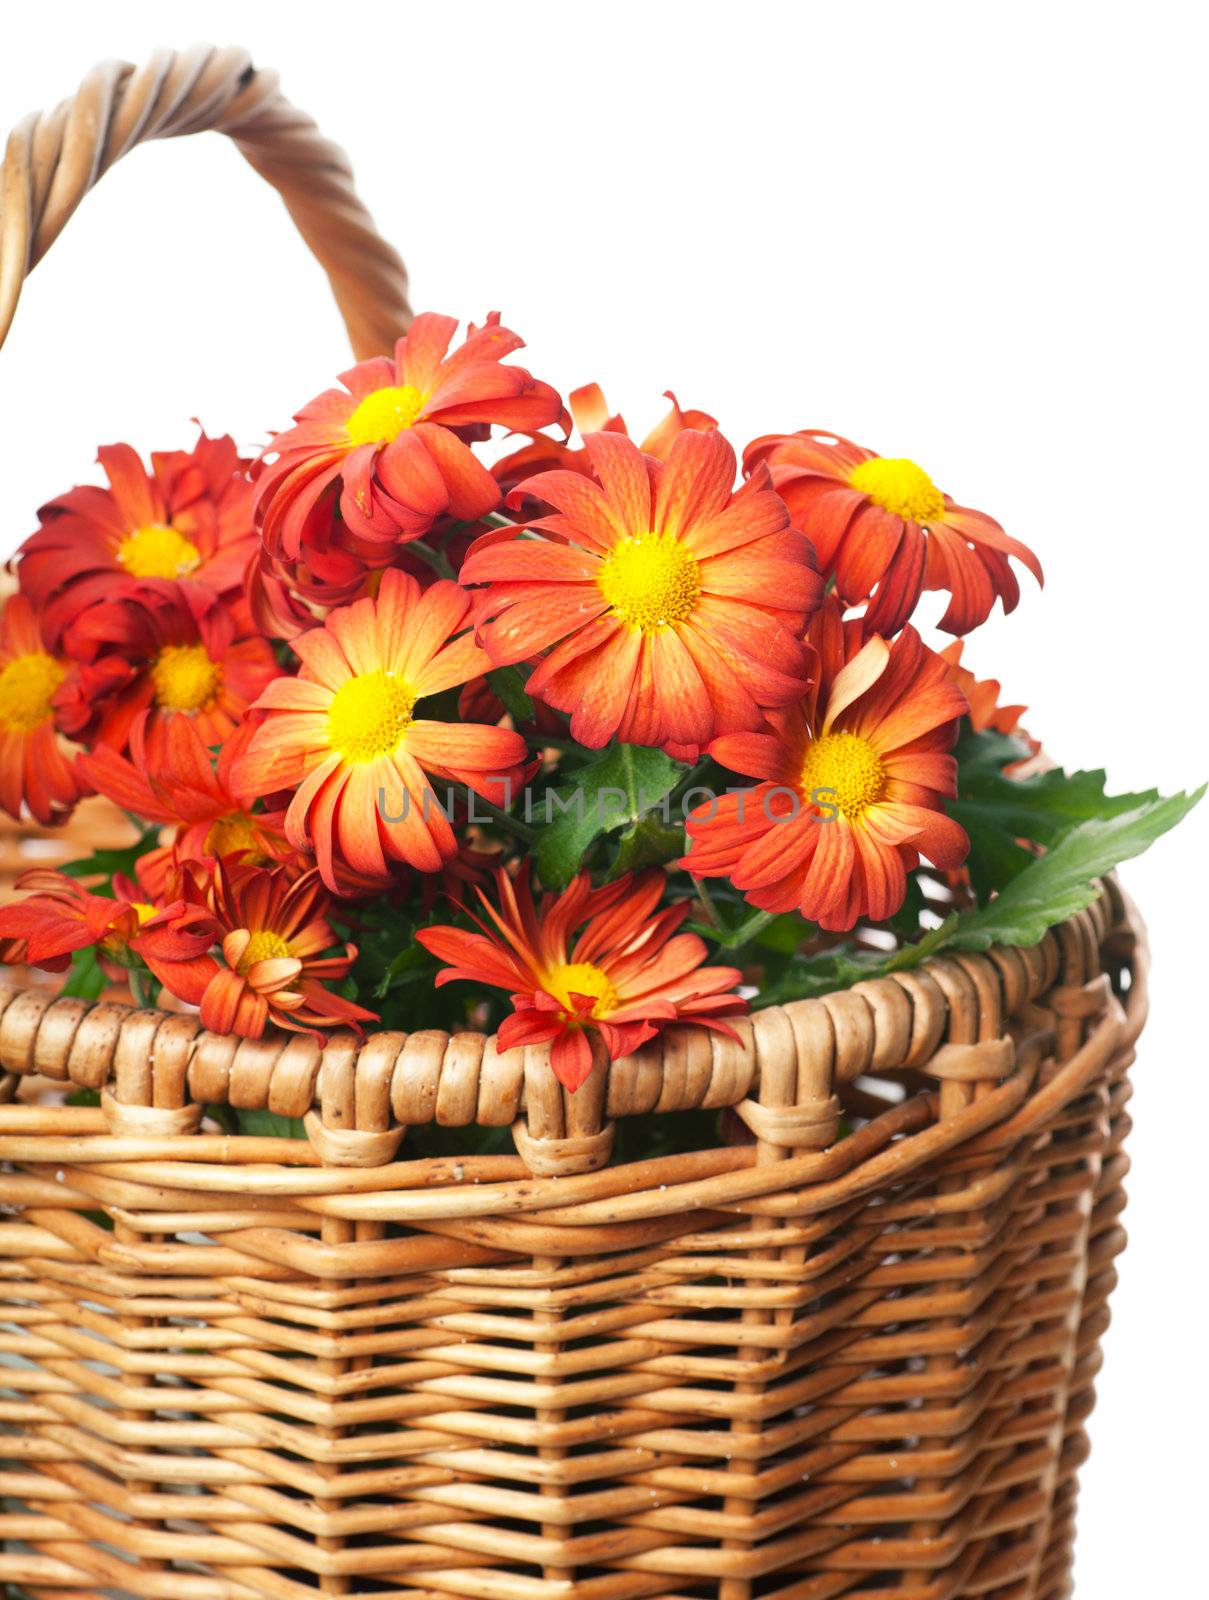 Chrysanthemum in a basket by AGorohov